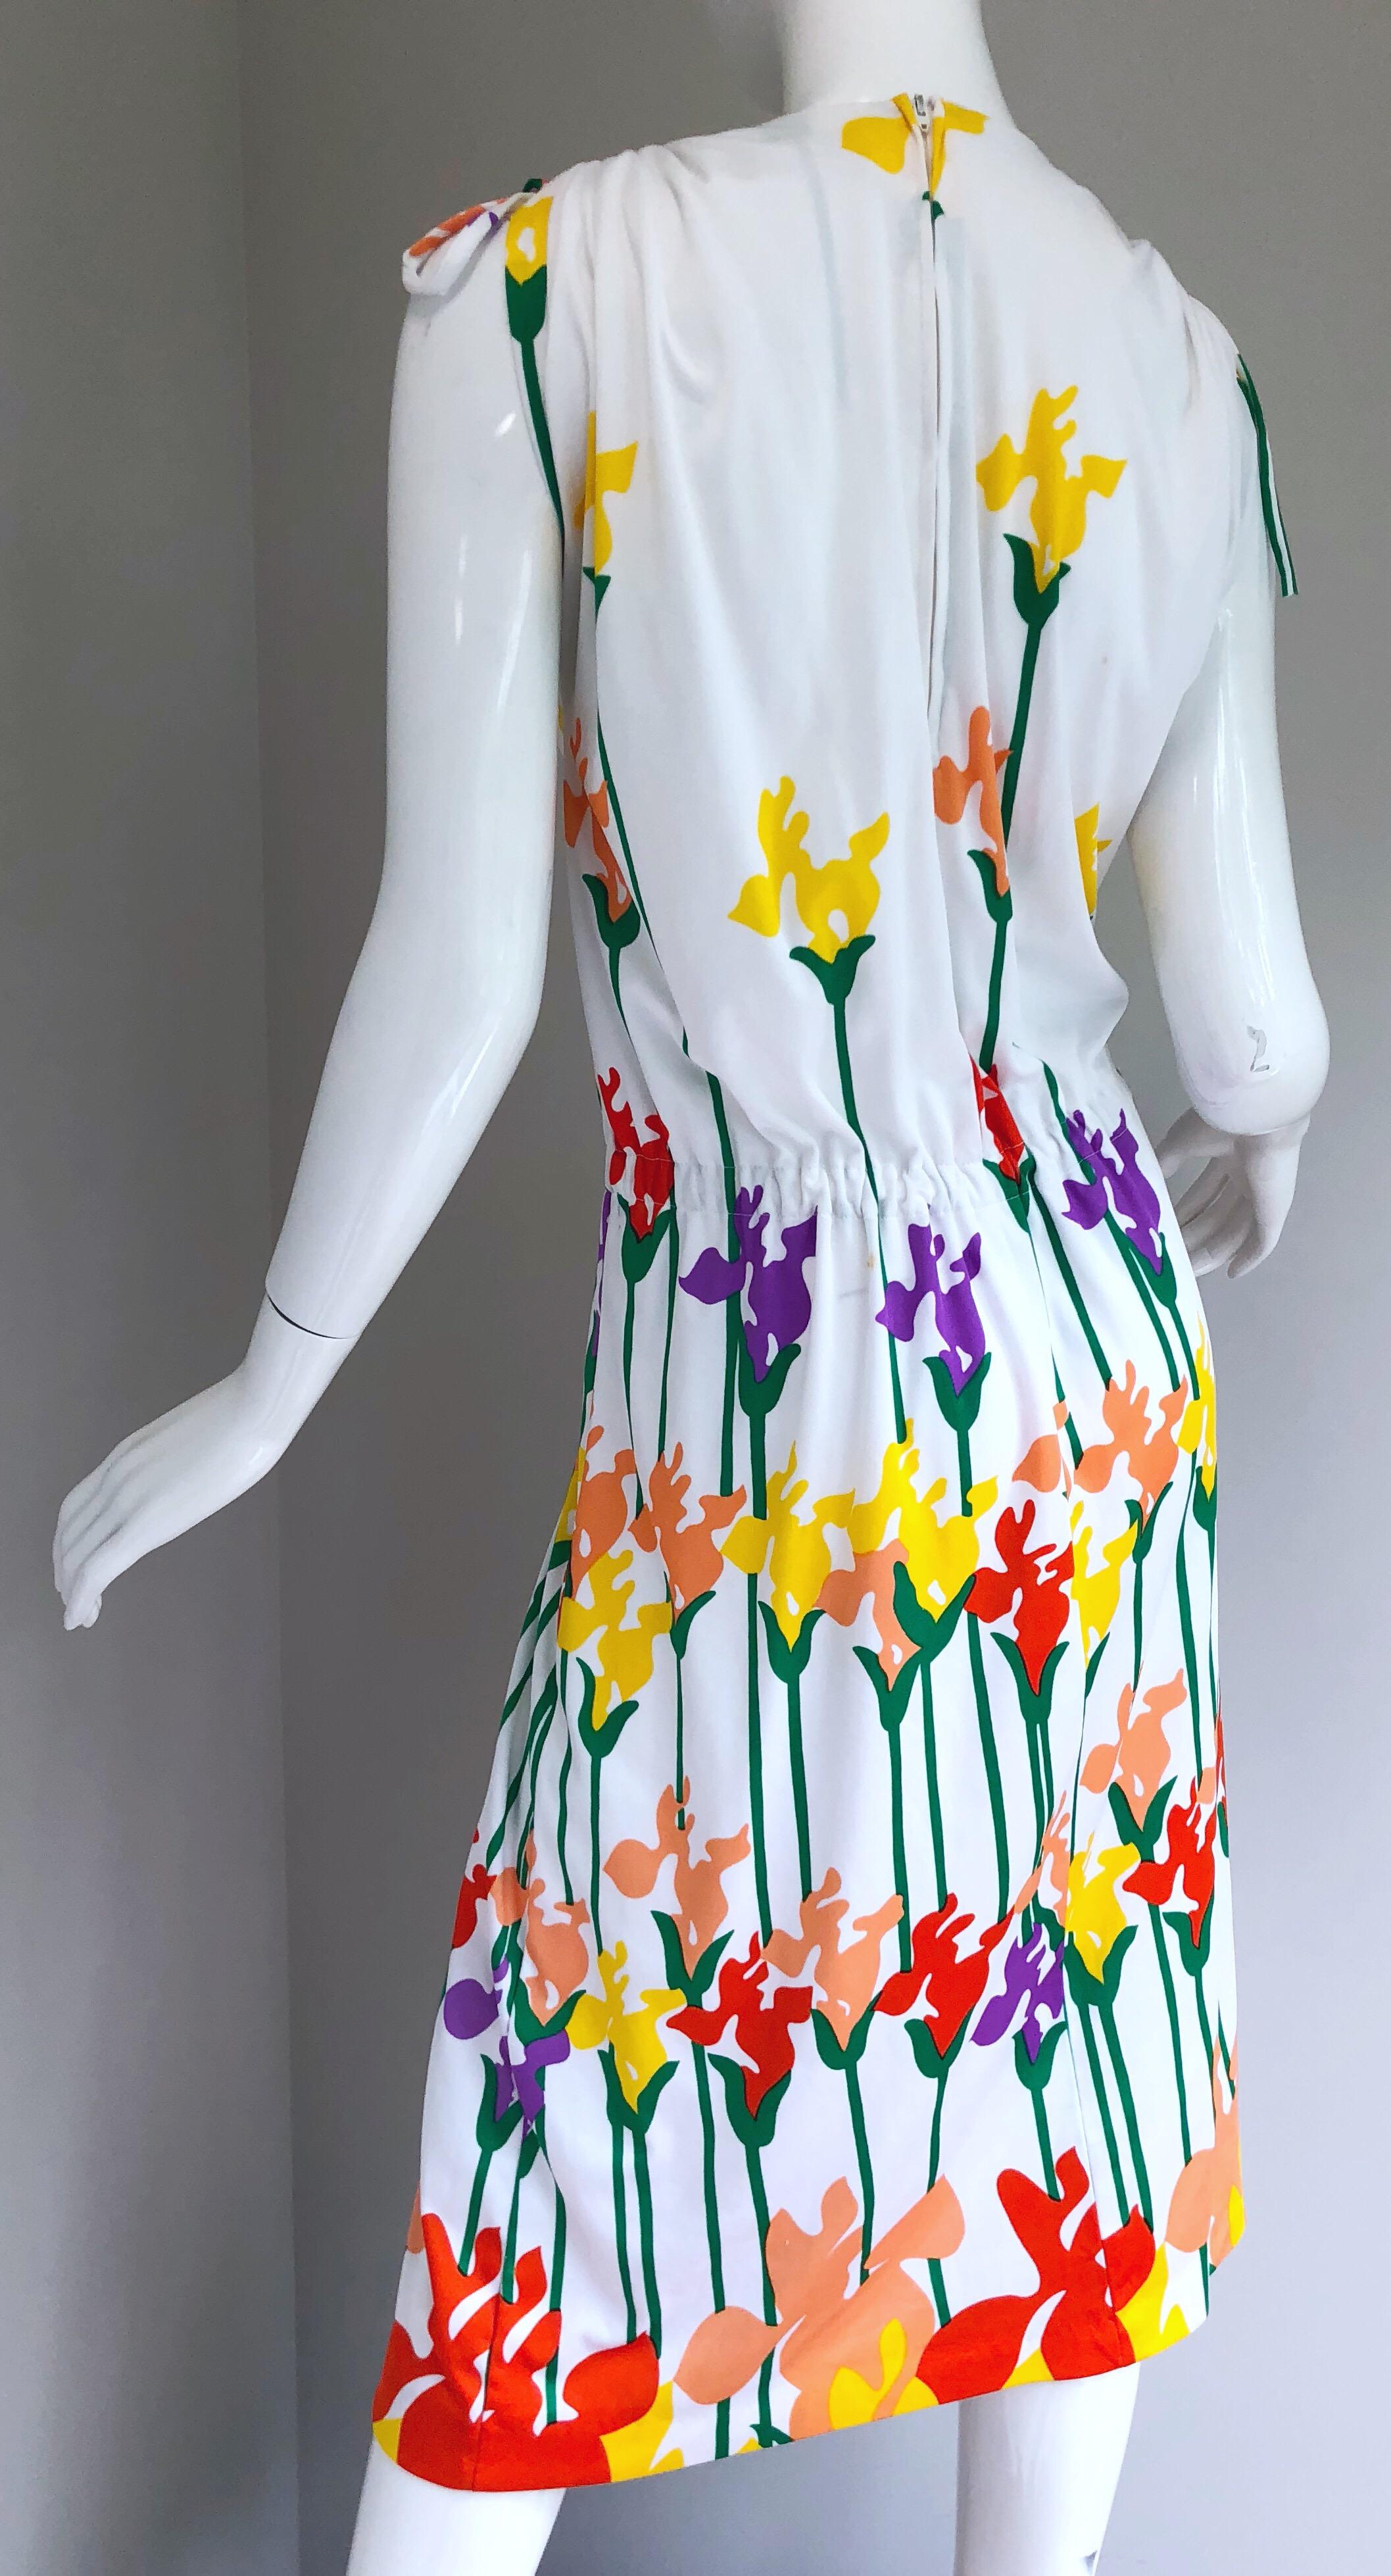 Lanvin Vintage 1970s Tulip Butterfly Print Colorful 70s Jersey Drawstring Dress For Sale 2